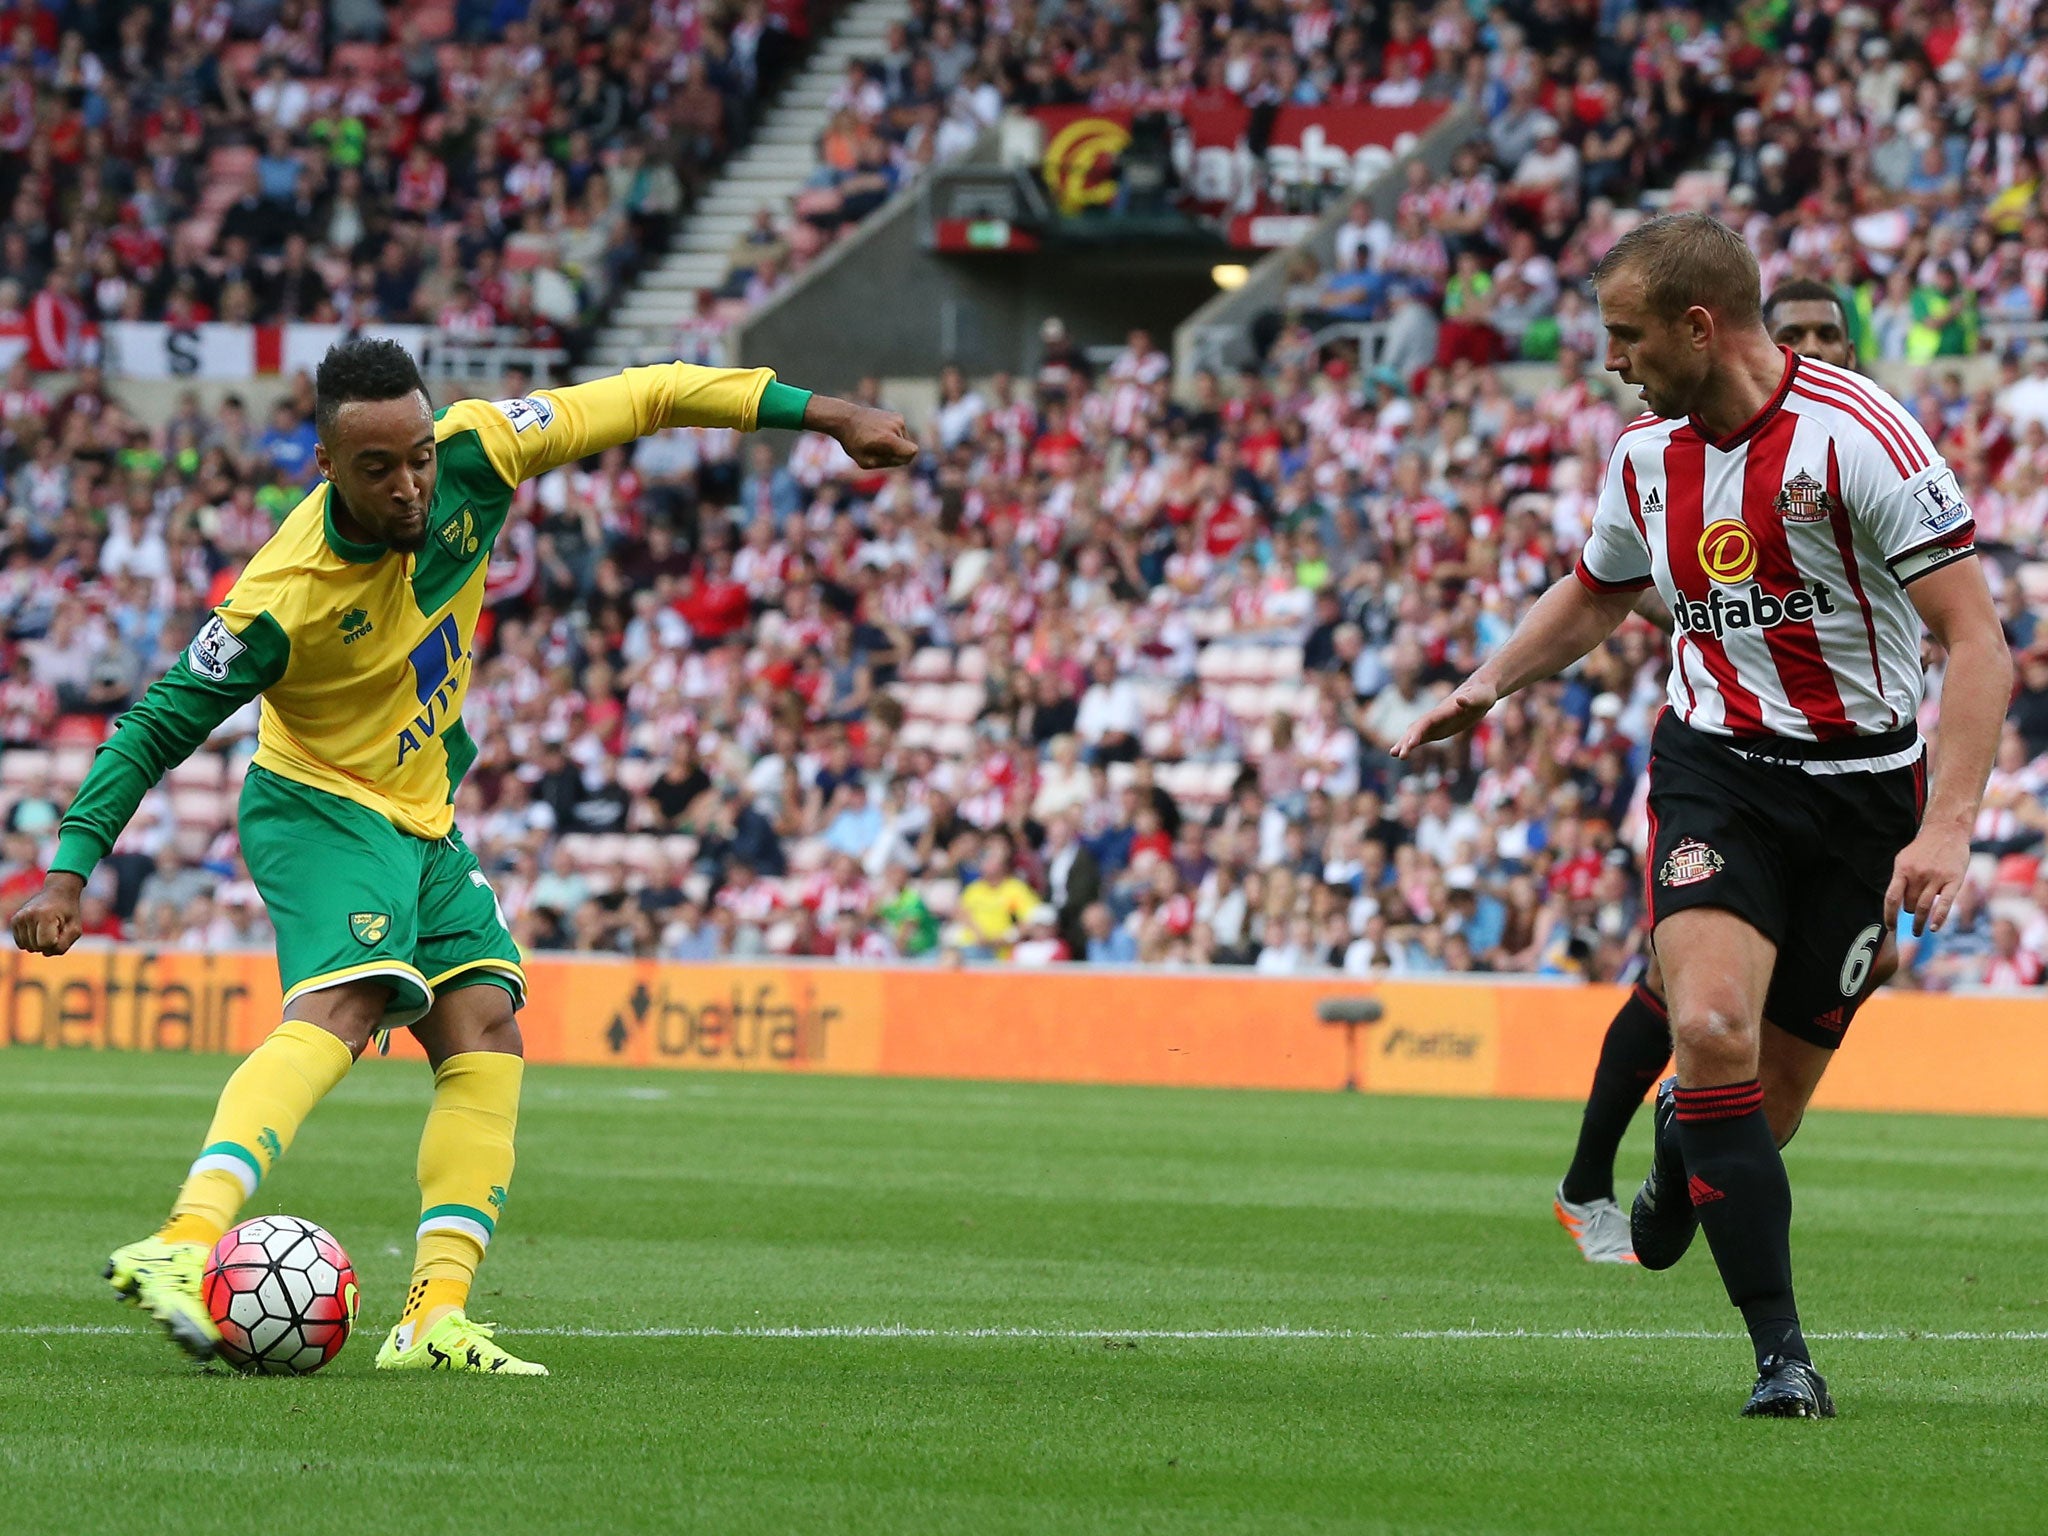 Nathan Redmond fired Norwich into a dominant 3-0 lead